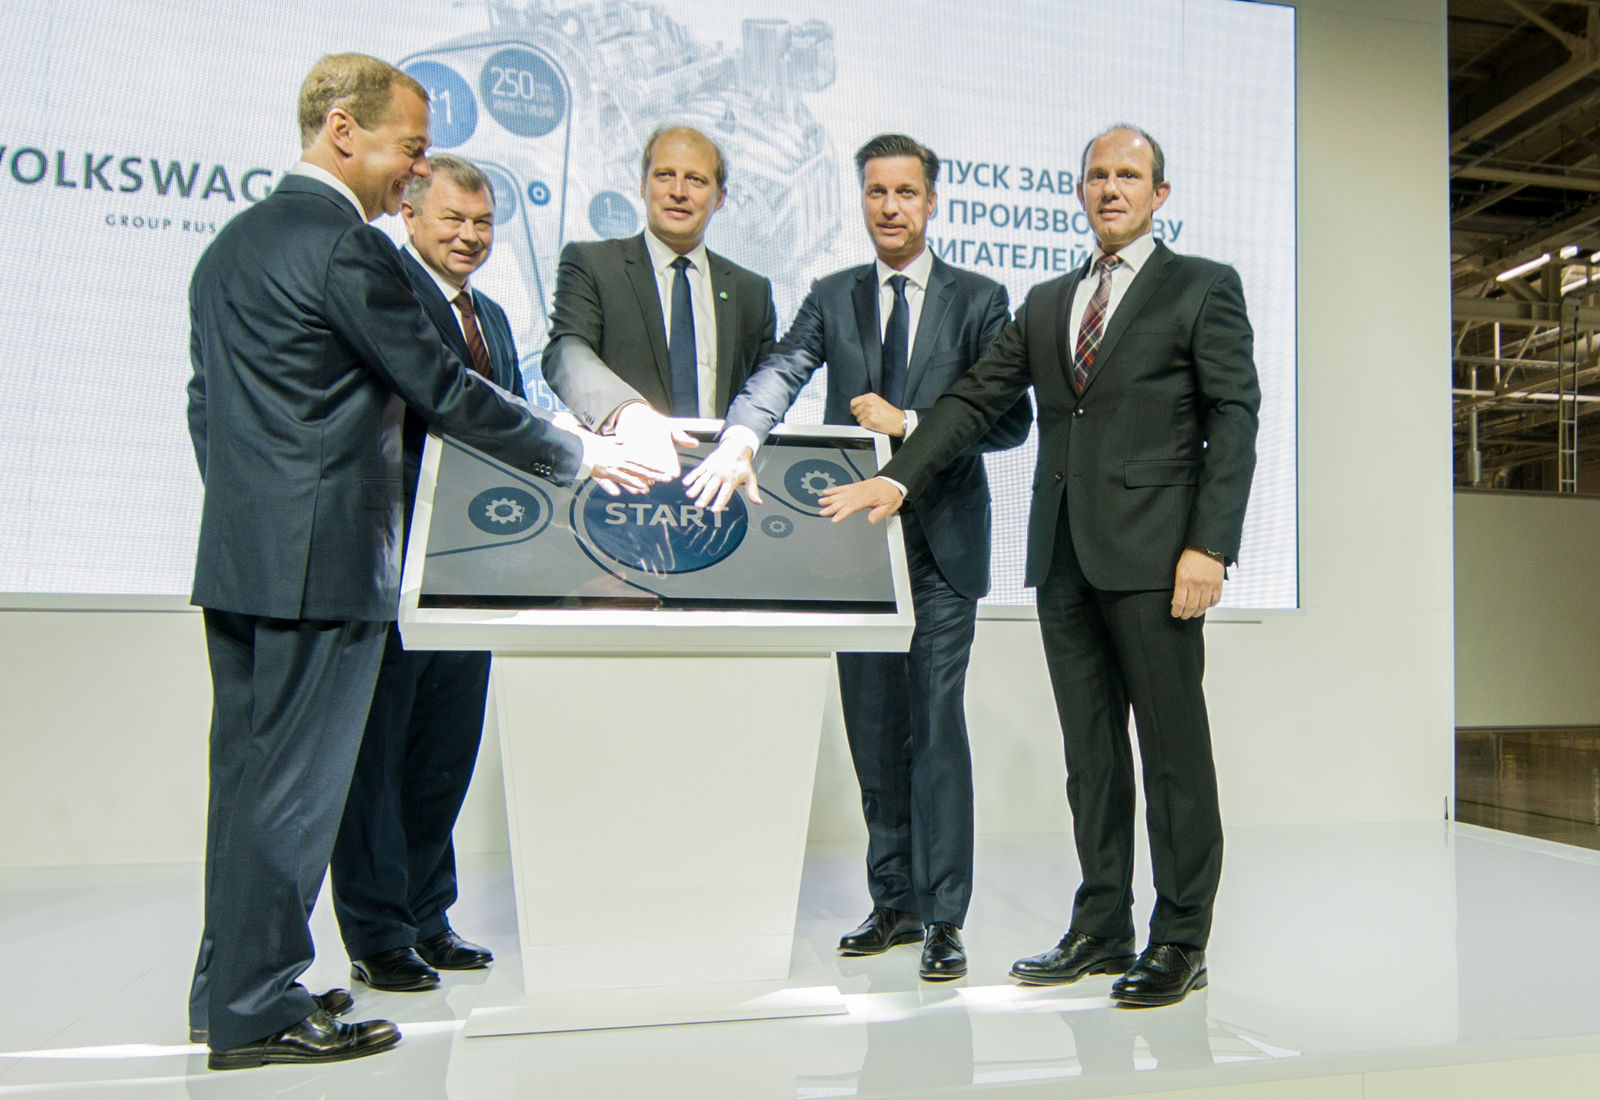 Volkswagen Group inaugurates its own engine plant in Russia